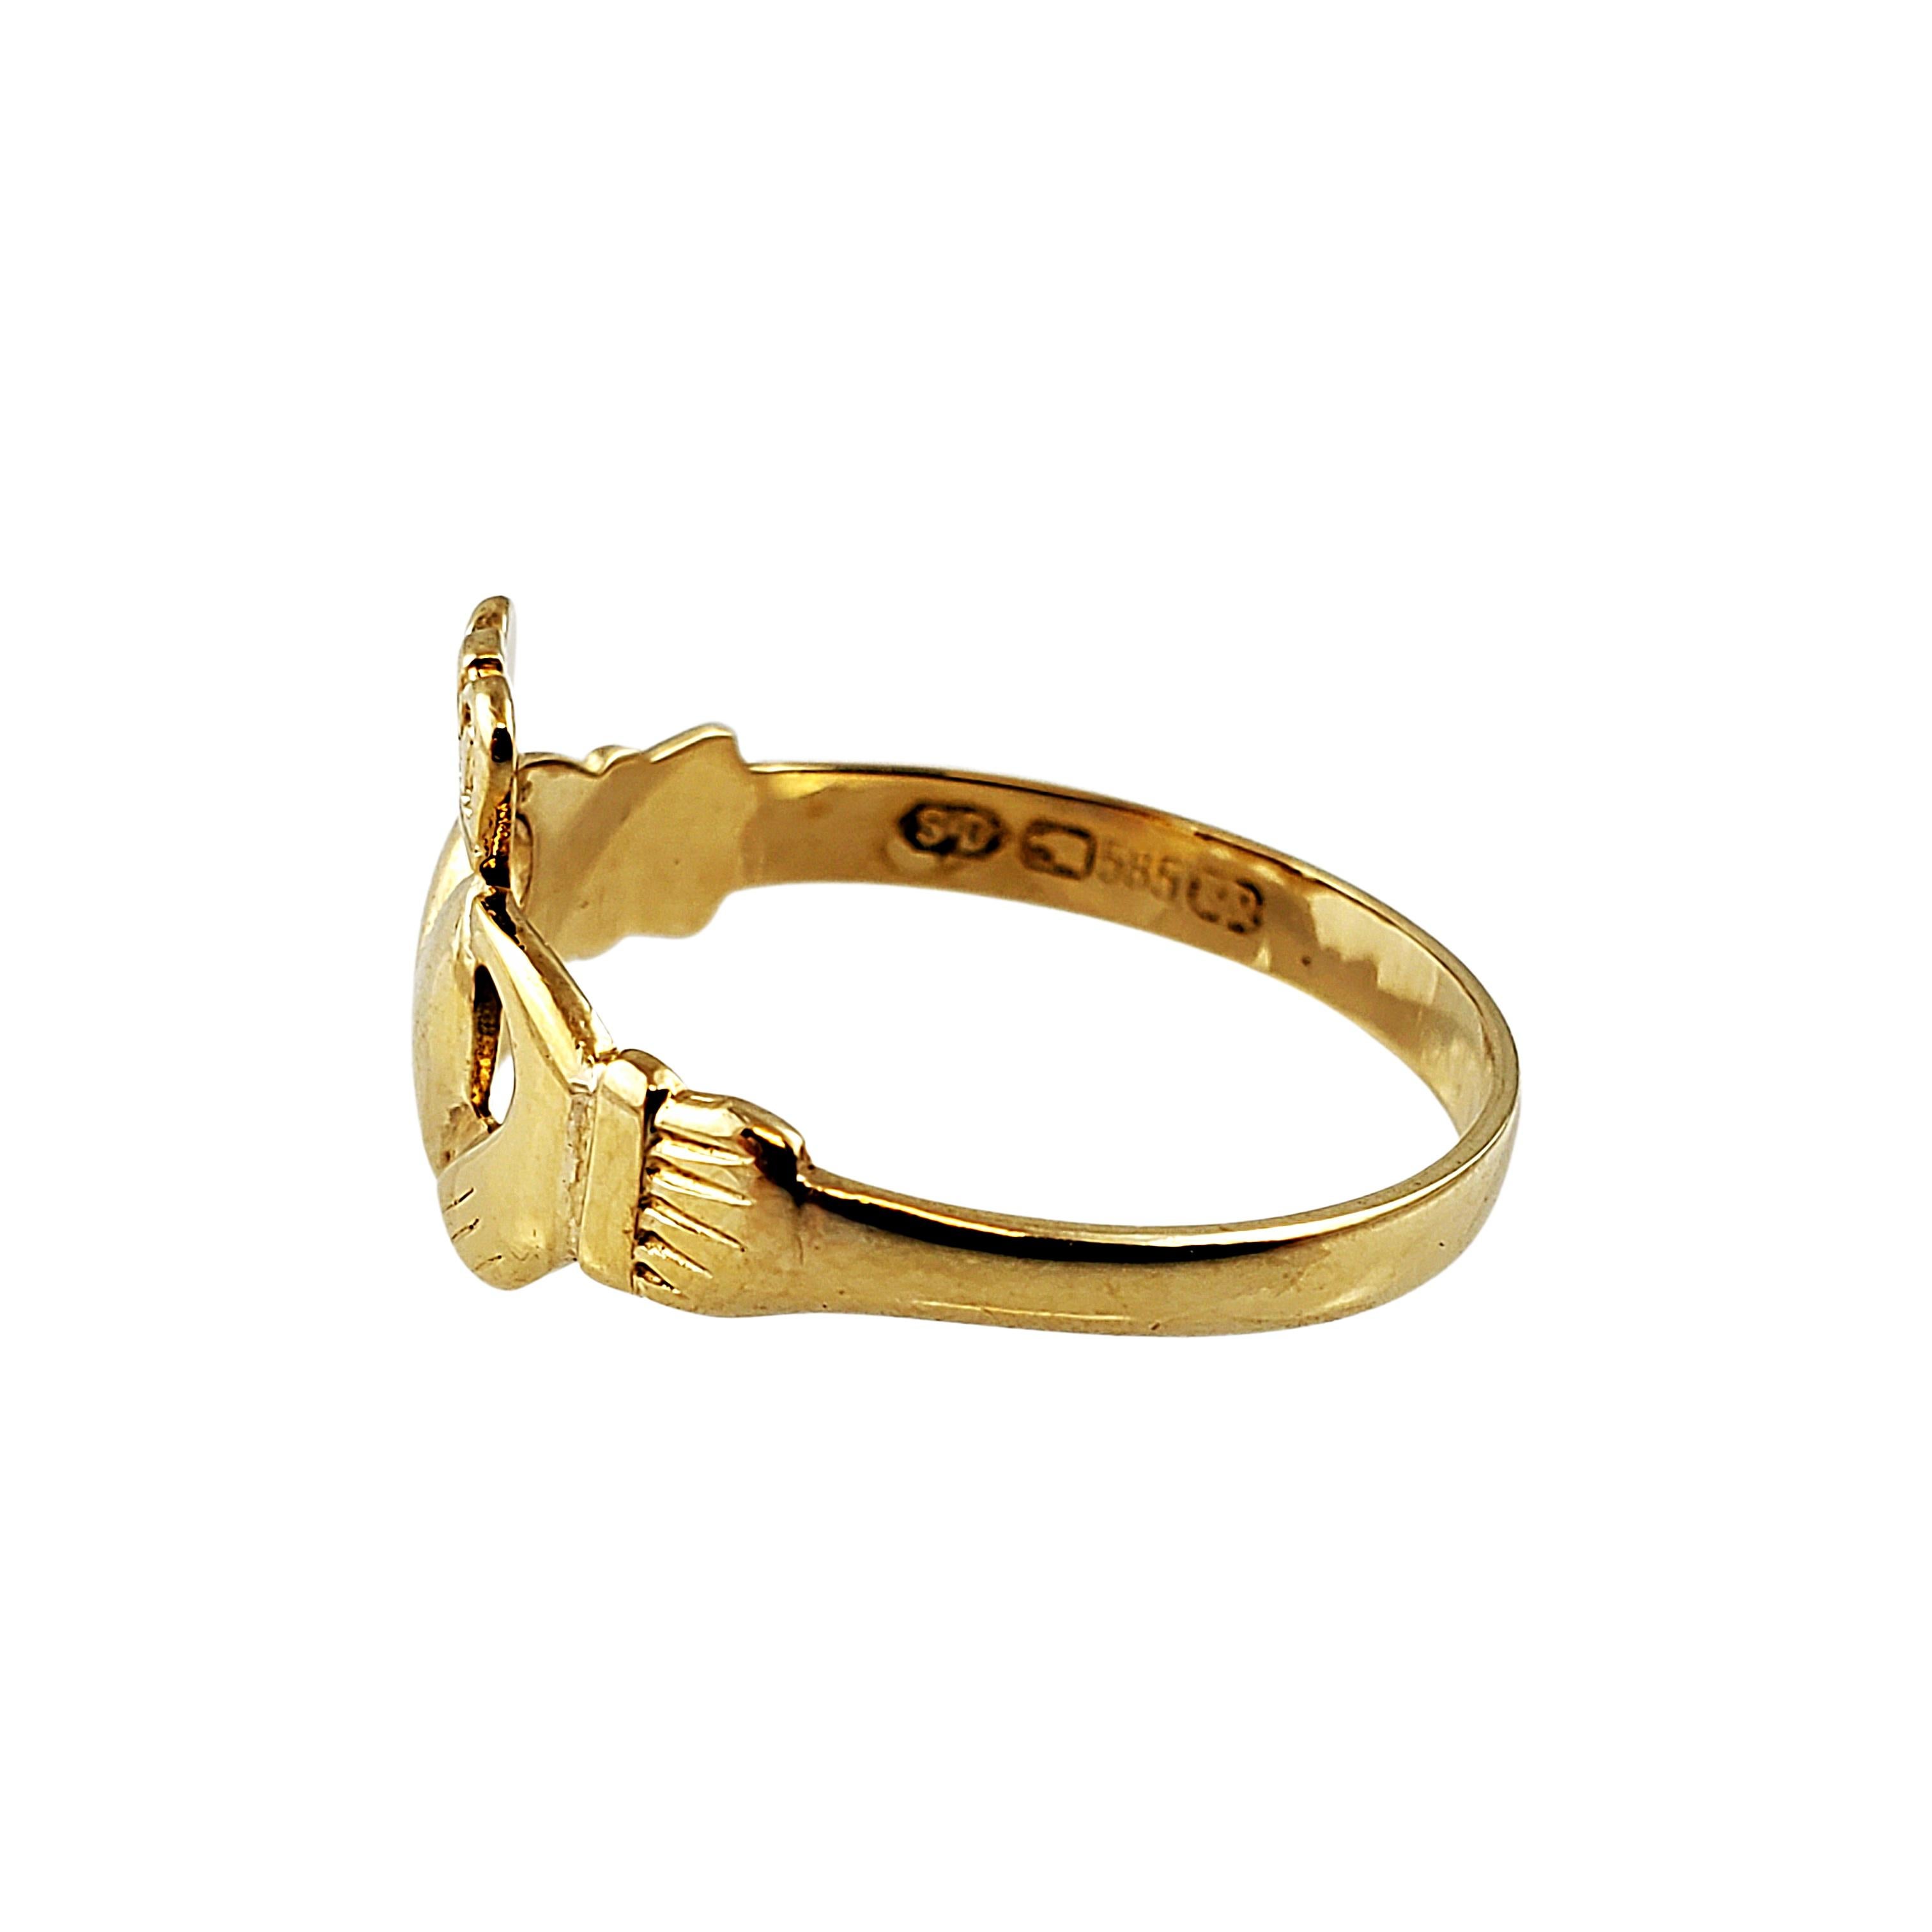 14K Yellow Gold Claddagh Ring Size 7

The Claddagh ring was originated in Galway Bay Ireland by a young man named Richard Joyce. He created the ring for his fiancé to symbolize friendship (hands), love (heart), and loyalty (crown). 

Beautiful 14k